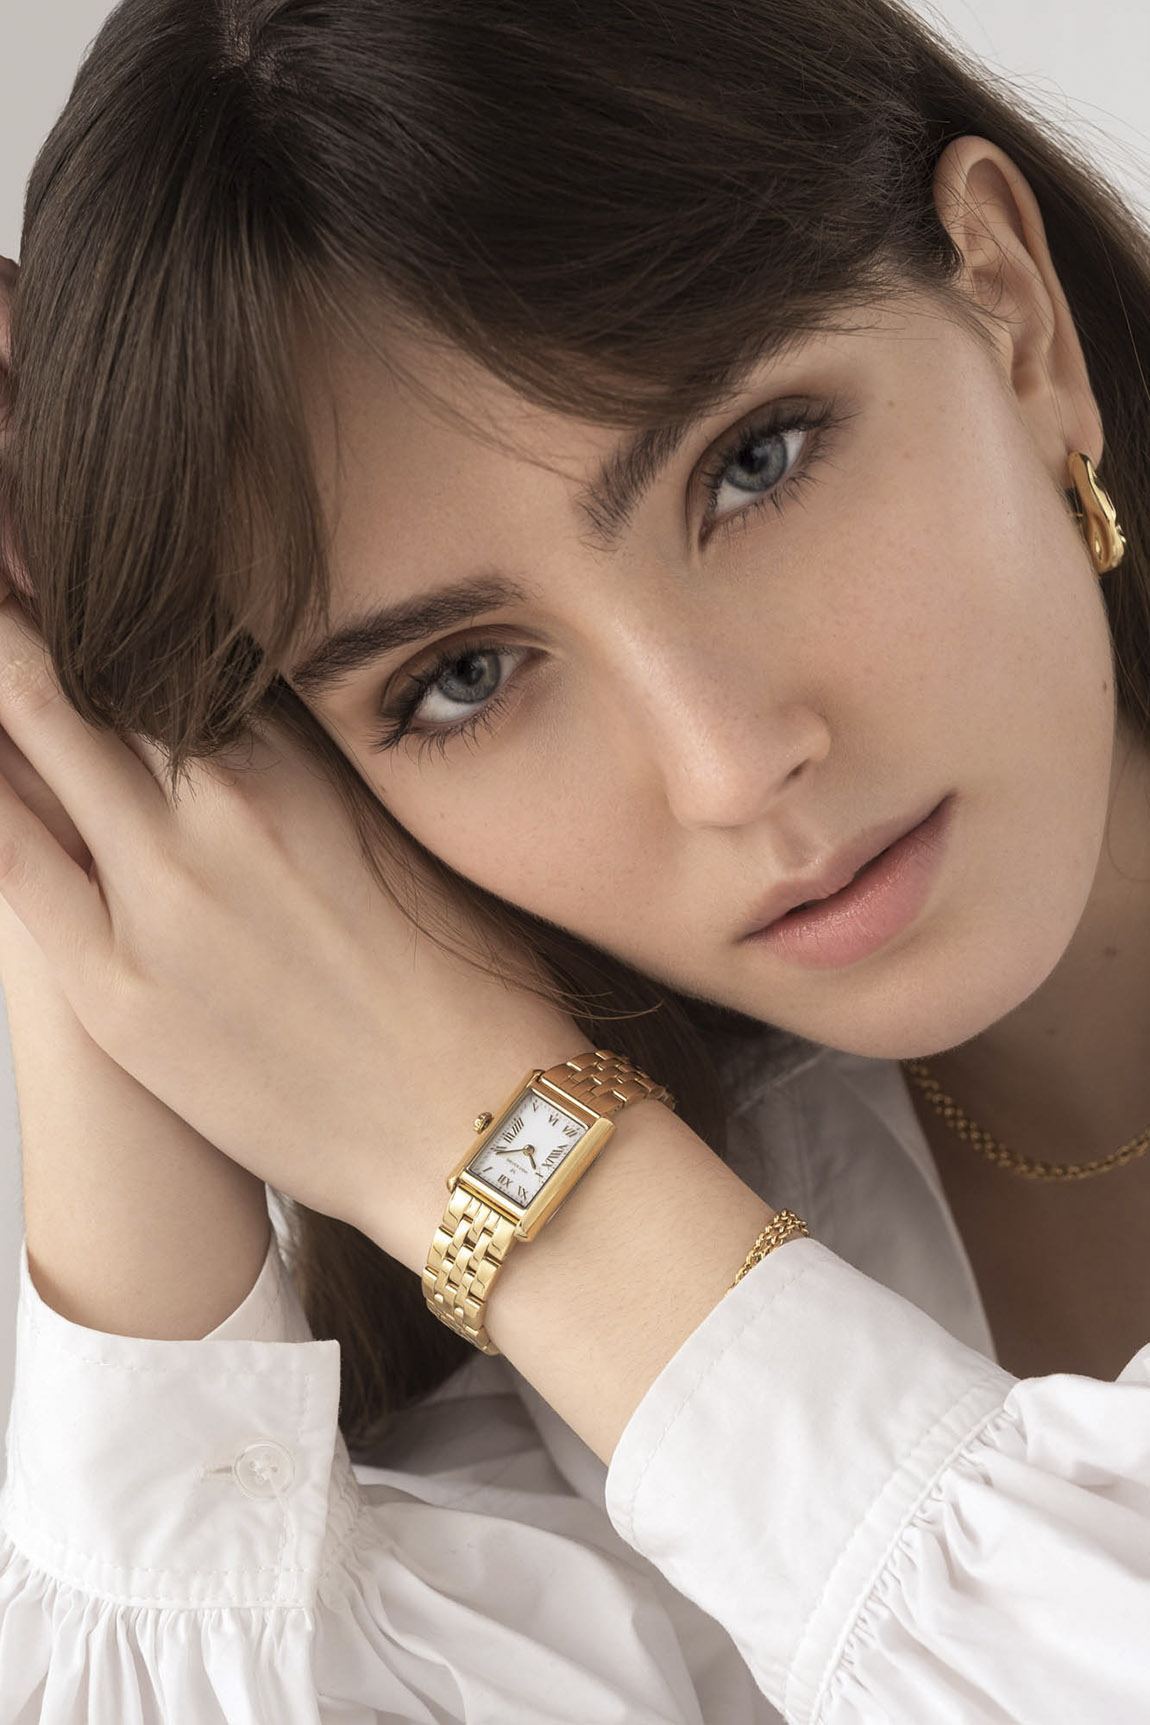 Mockberg: The perfect women’s watch to complete your outfit